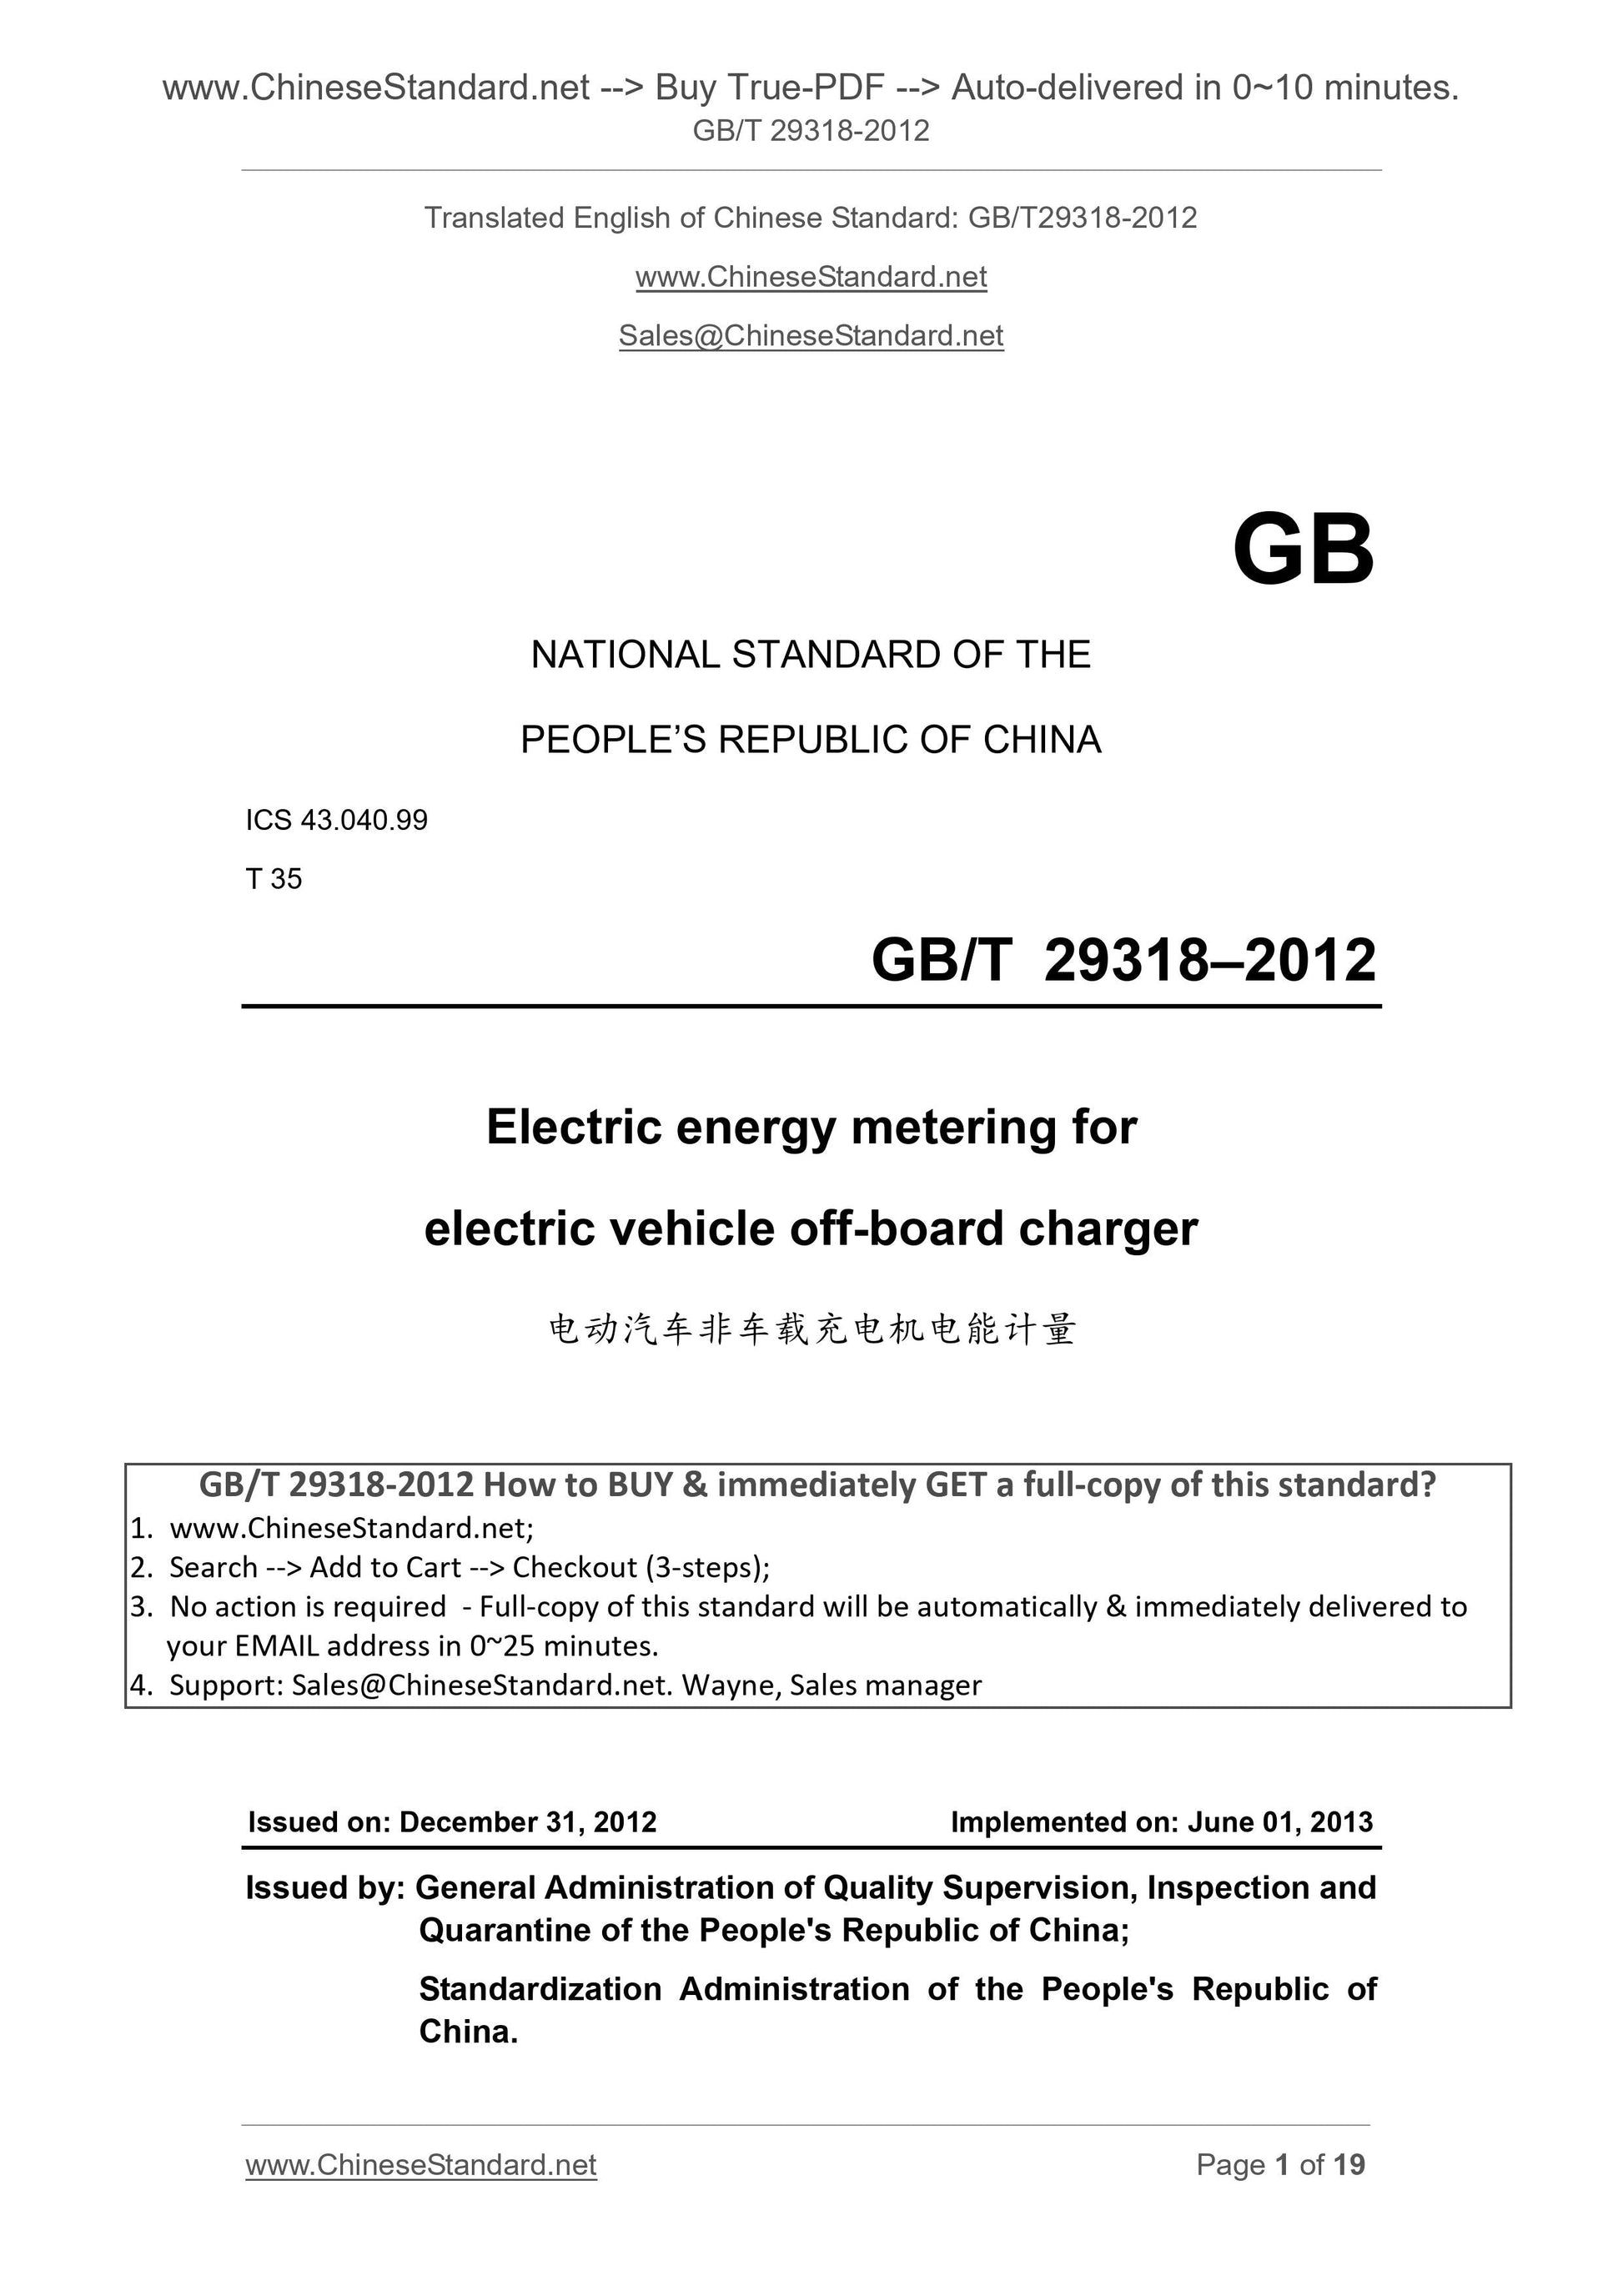 GB/T 29318-2012 Page 1